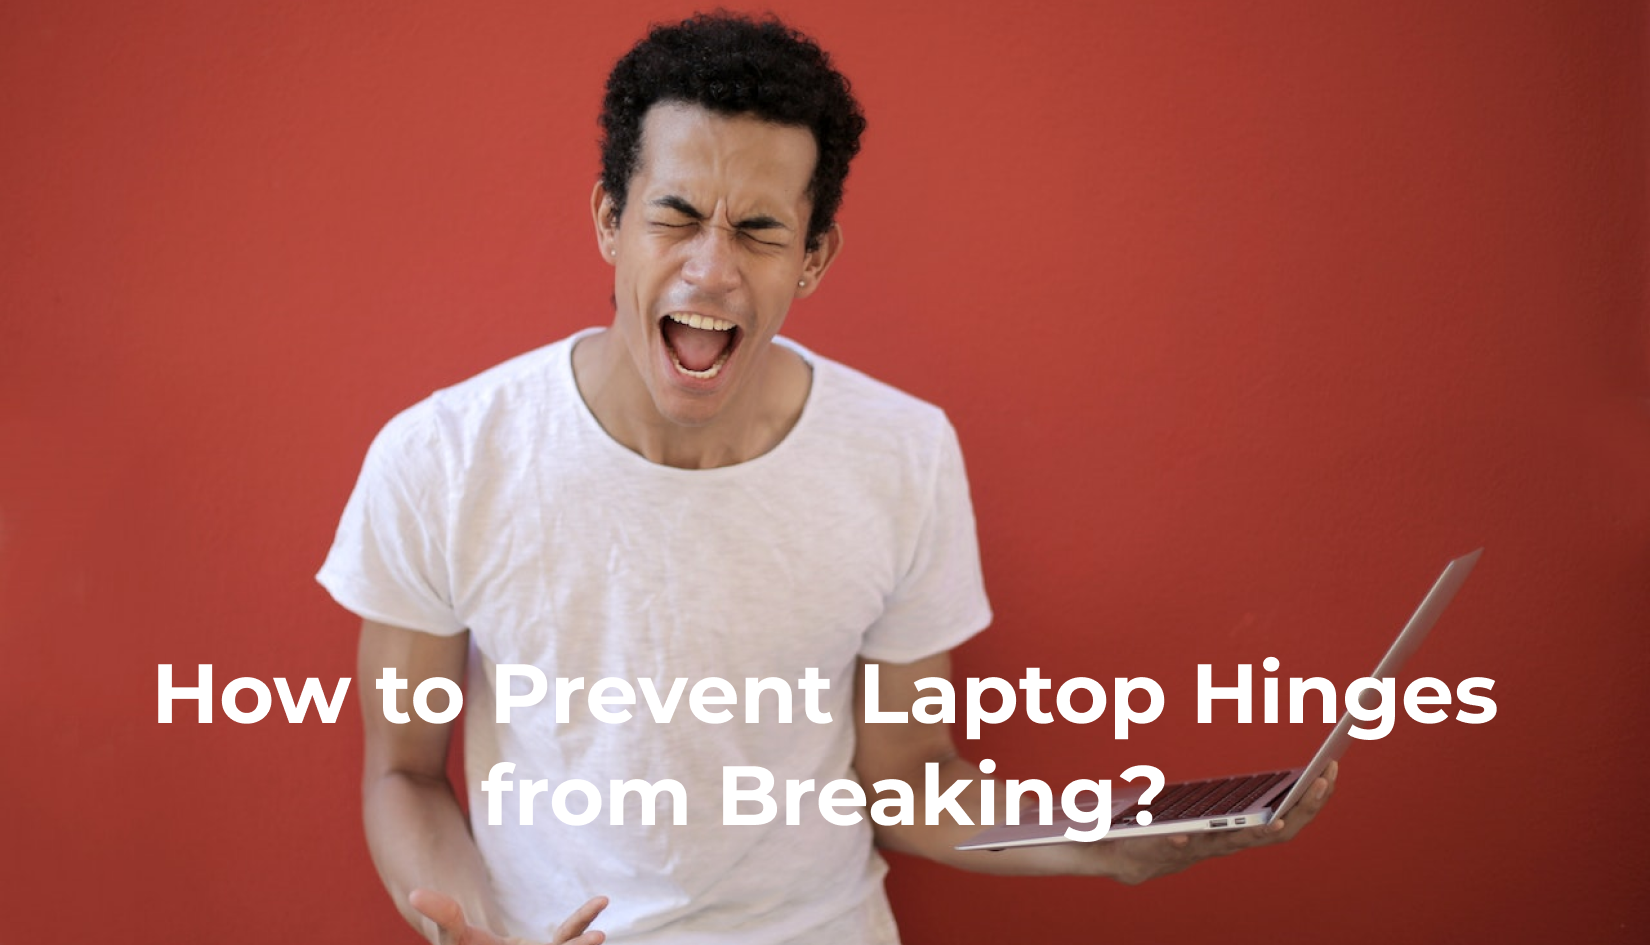 7 Ways to Prevent Laptop Hinges from Breaking